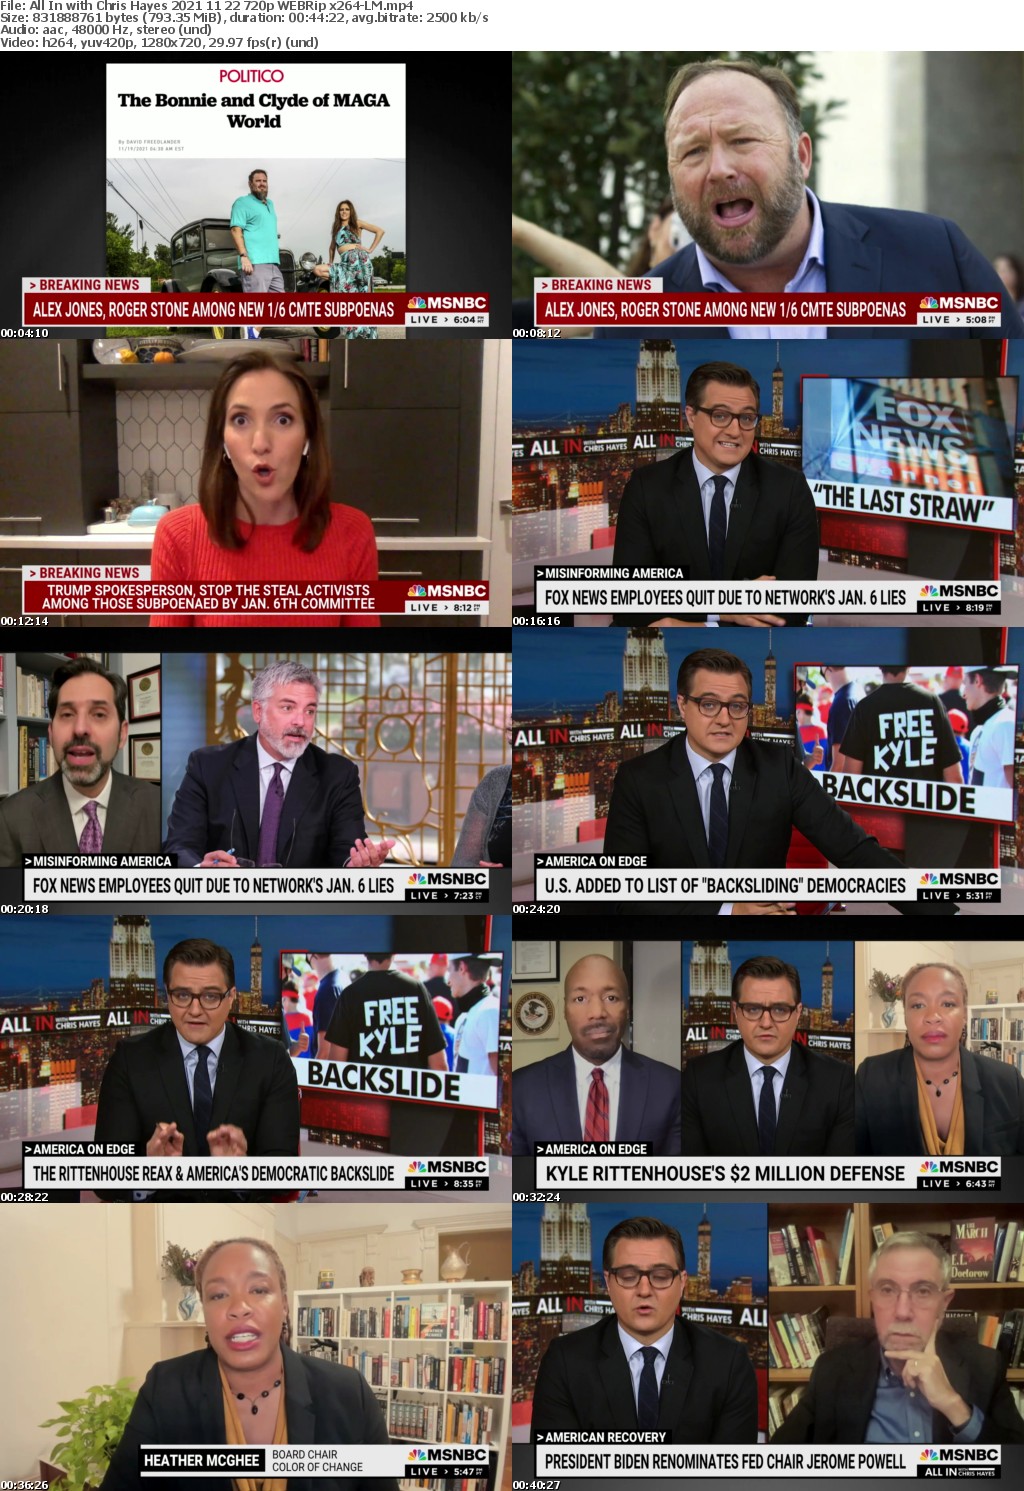 All In with Chris Hayes 2021 11 22 720p WEBRip x264-LM